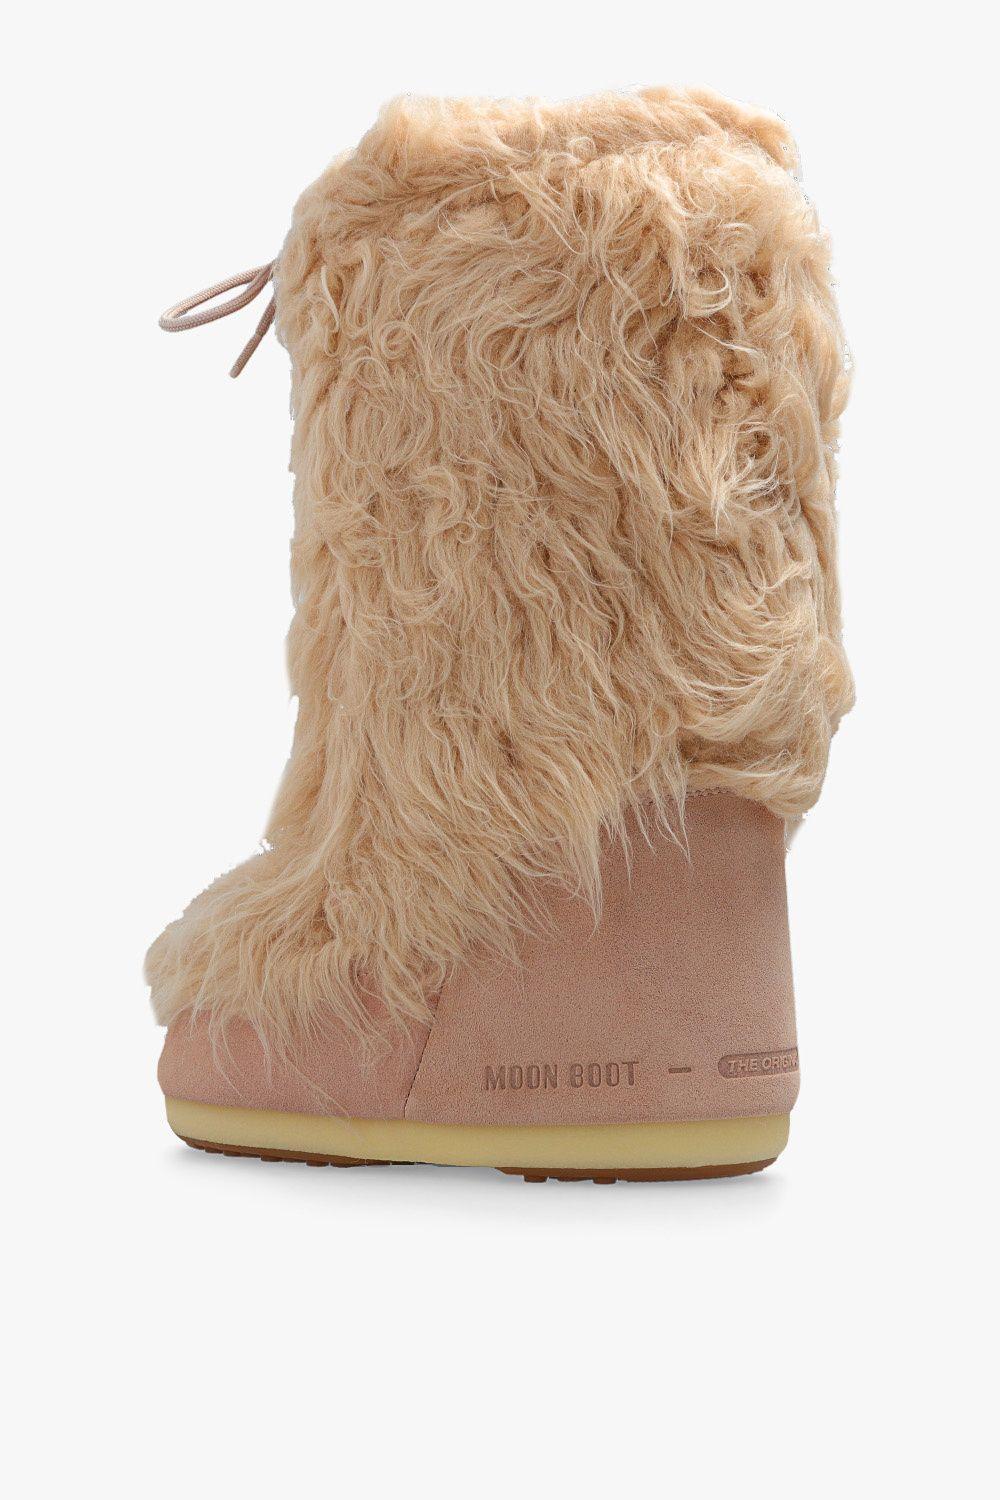 Moon Boot 'icon Yeti' Snow Boots in Brown | Lyst